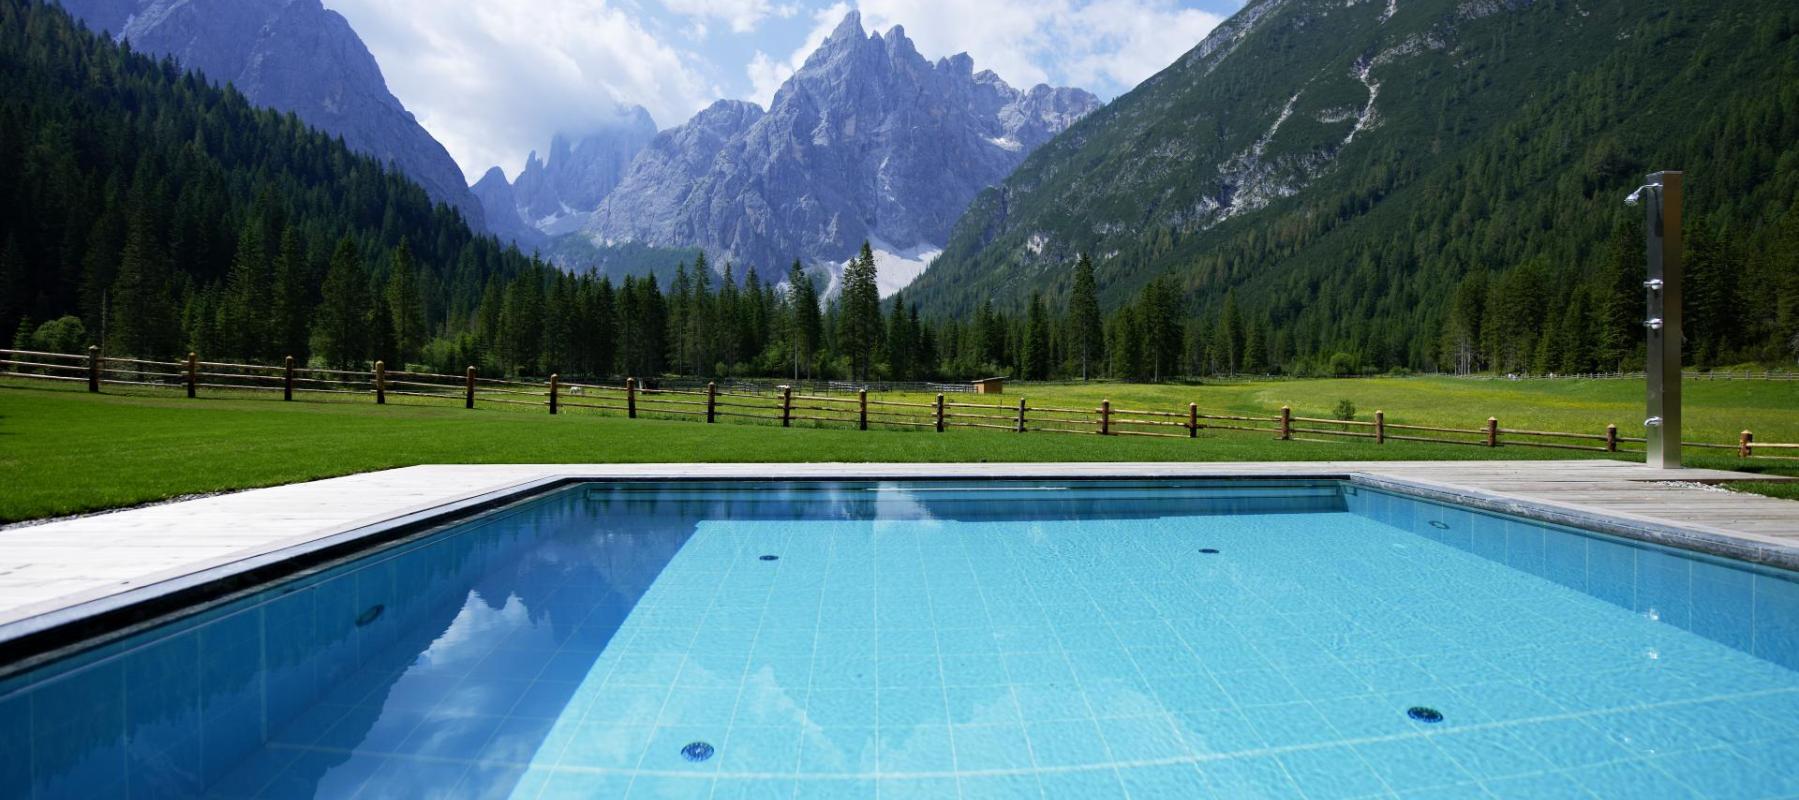 The outdoor pool in summer